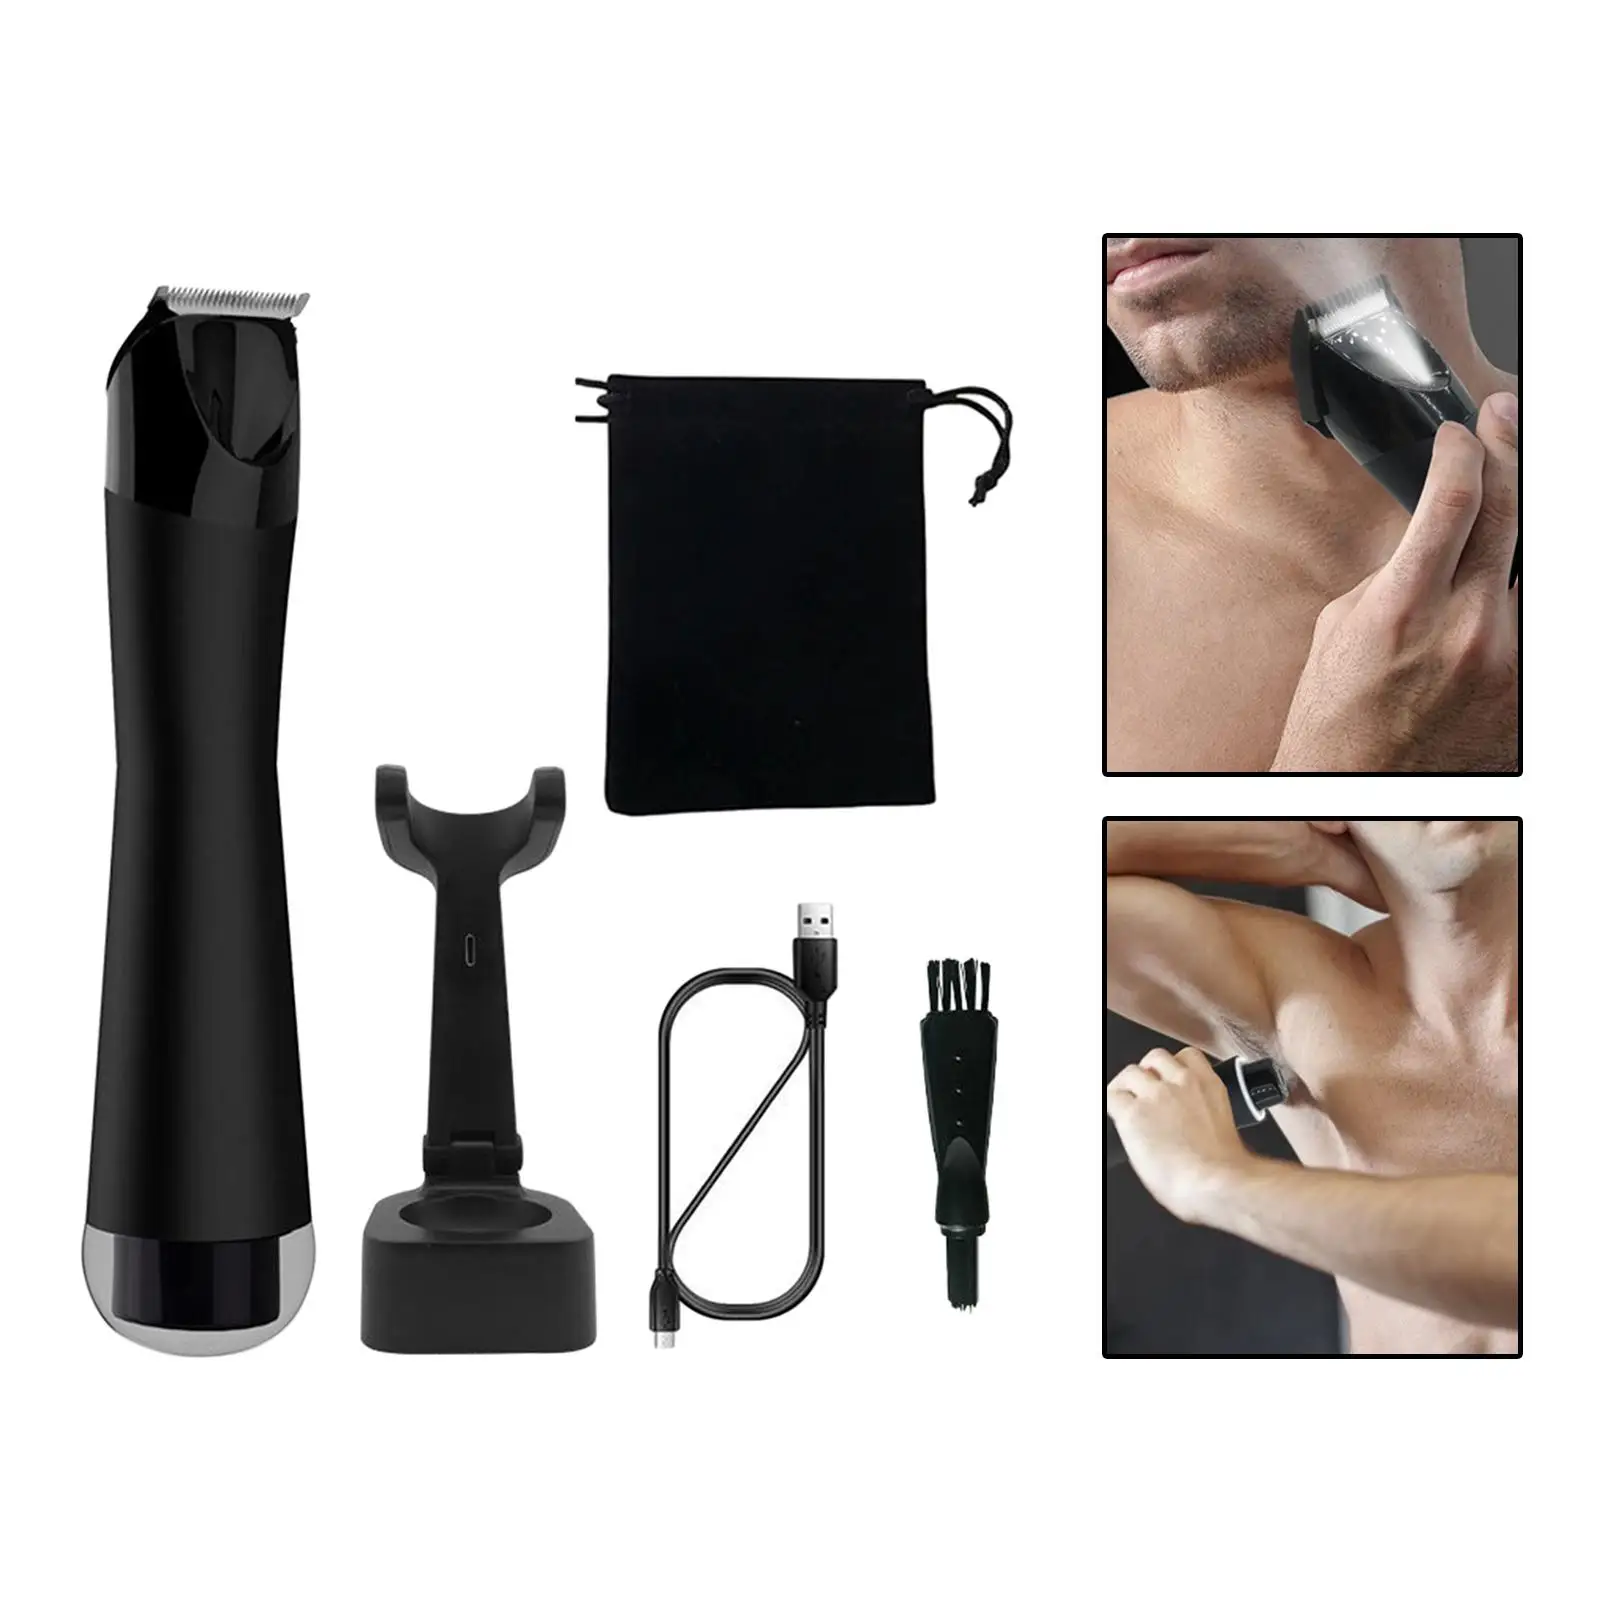 2 in 1 Electric Groin Hair Shaver for Men, USB Charging Lightweight Washable Cordless for Arms Belly Back Male Grooming Tools